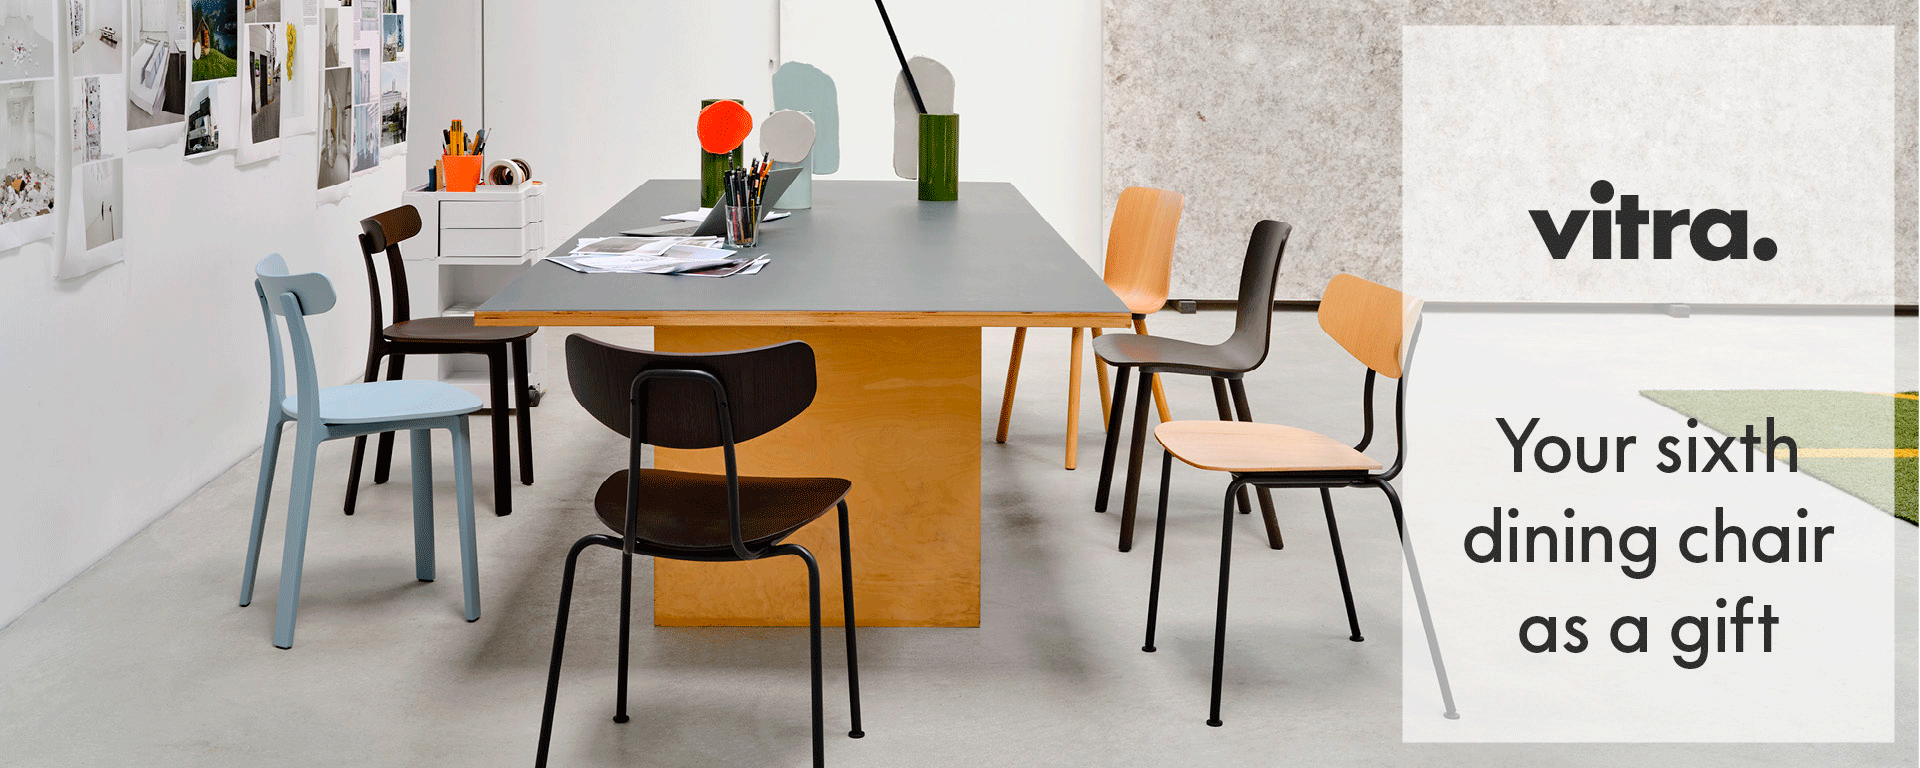 Vitra Home Stories For Winter 2020 Dining Chair Promotion